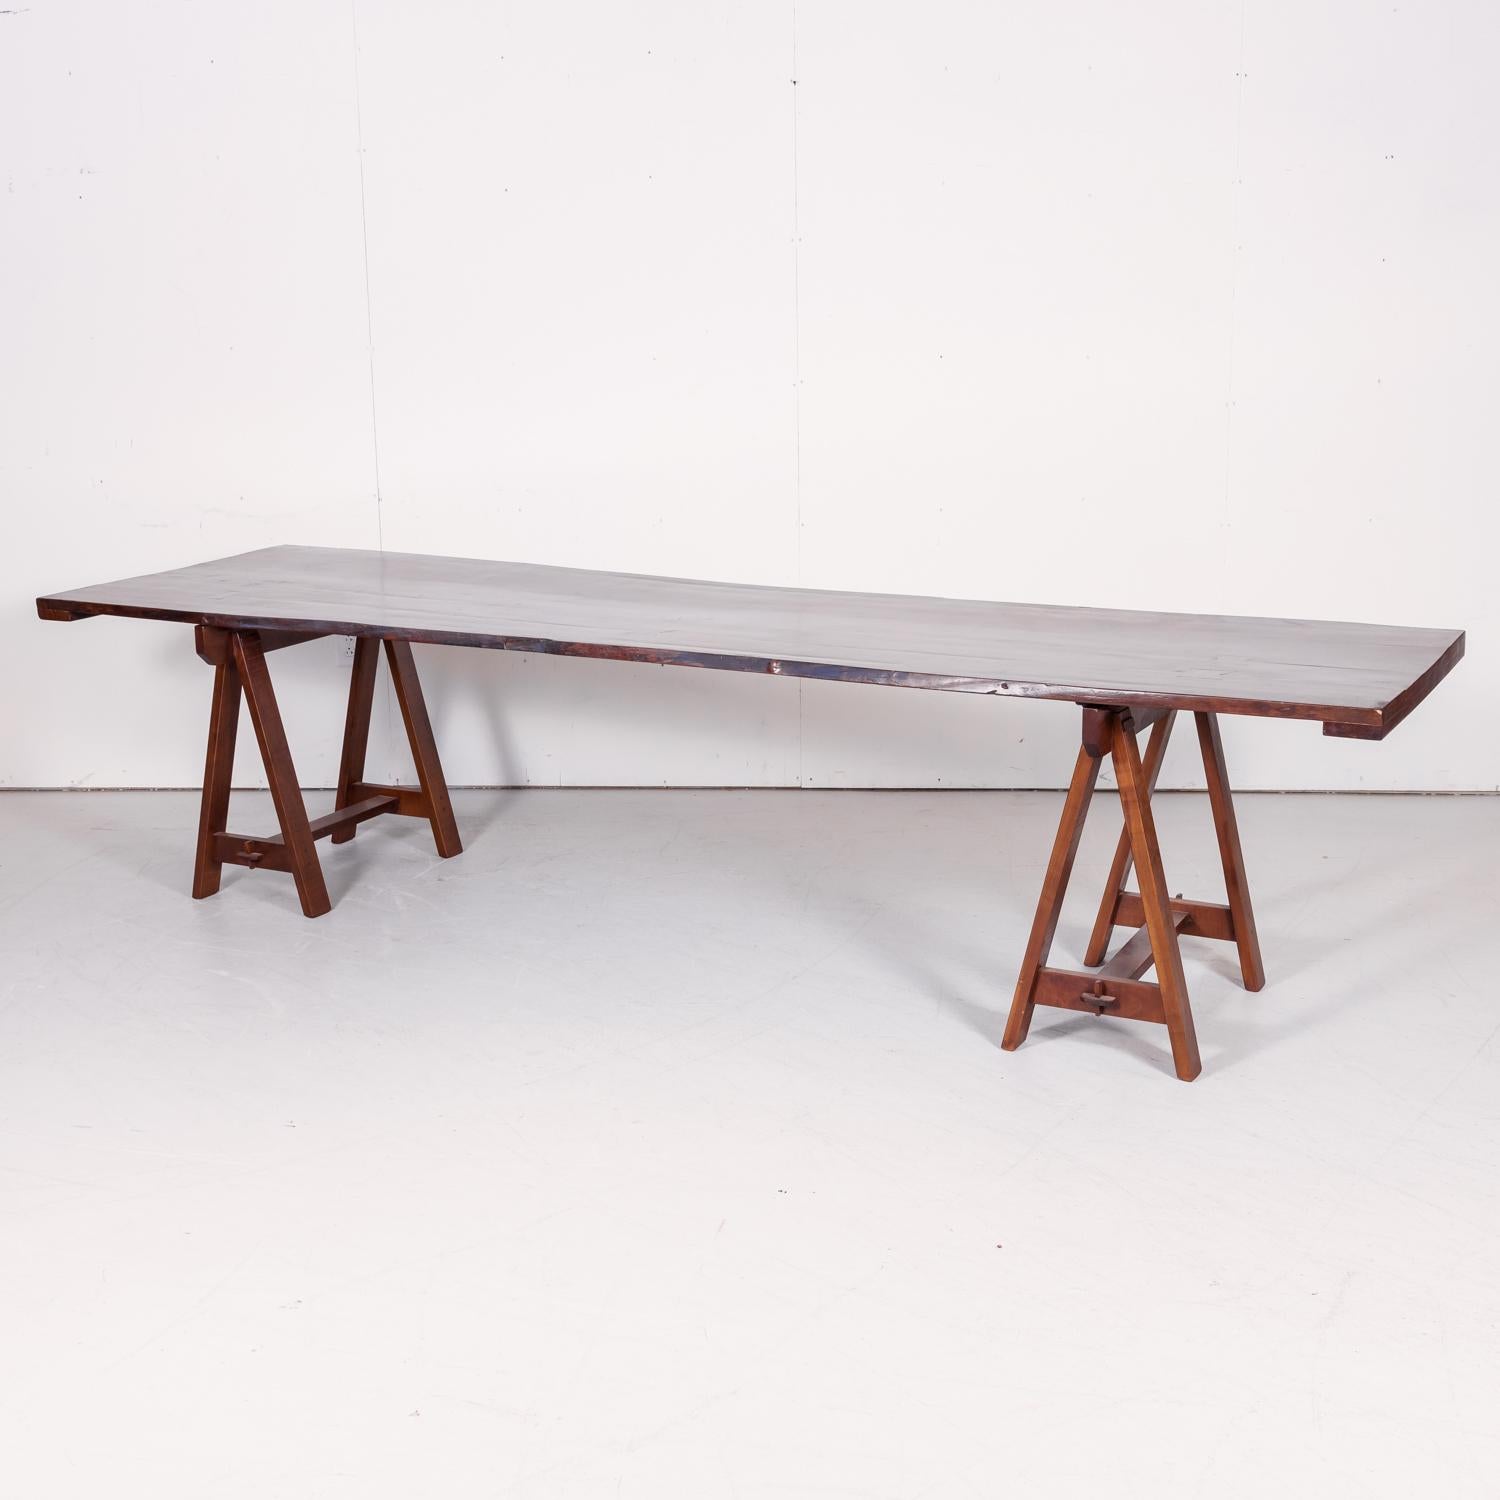 Impressive live edge apple harvest trestle table custom made in France of 19th century reclaimed cherry wood by a skilled French ebéniste after an 18th century harvest table we found in Normandy. At 10.5 feet in length, this beautiful plank top